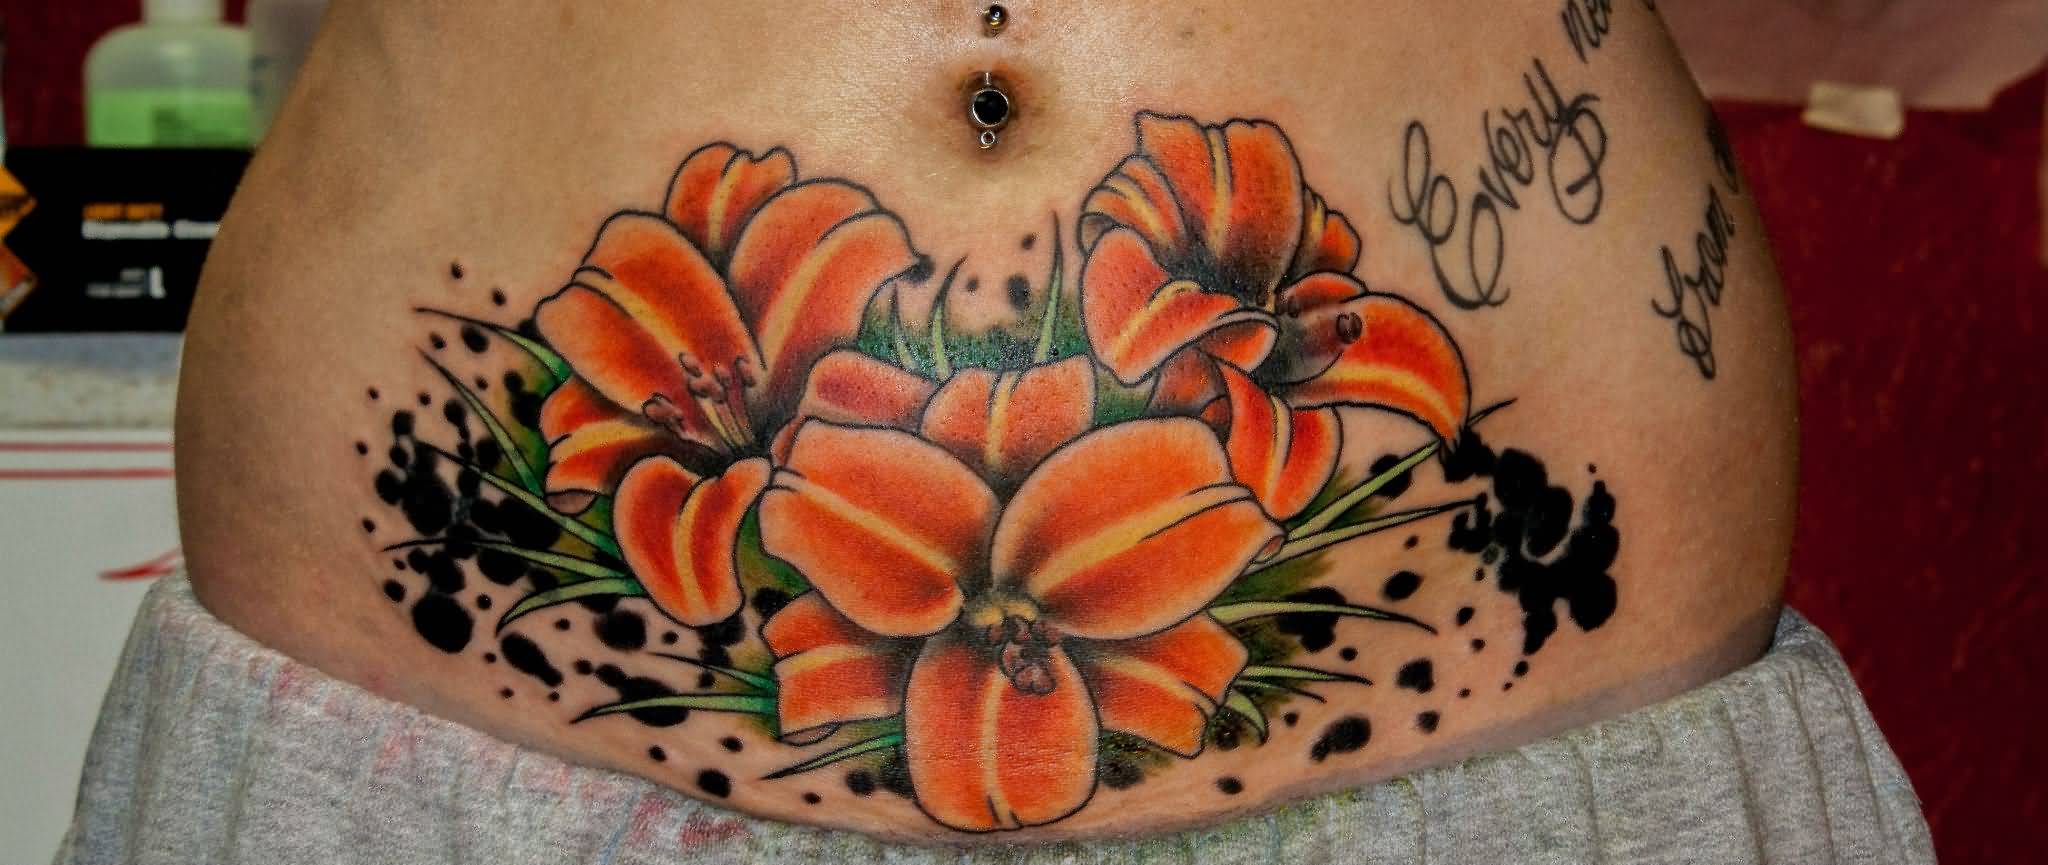 Orange Ink Lily Flowers Cover Up Tattoo On Waist